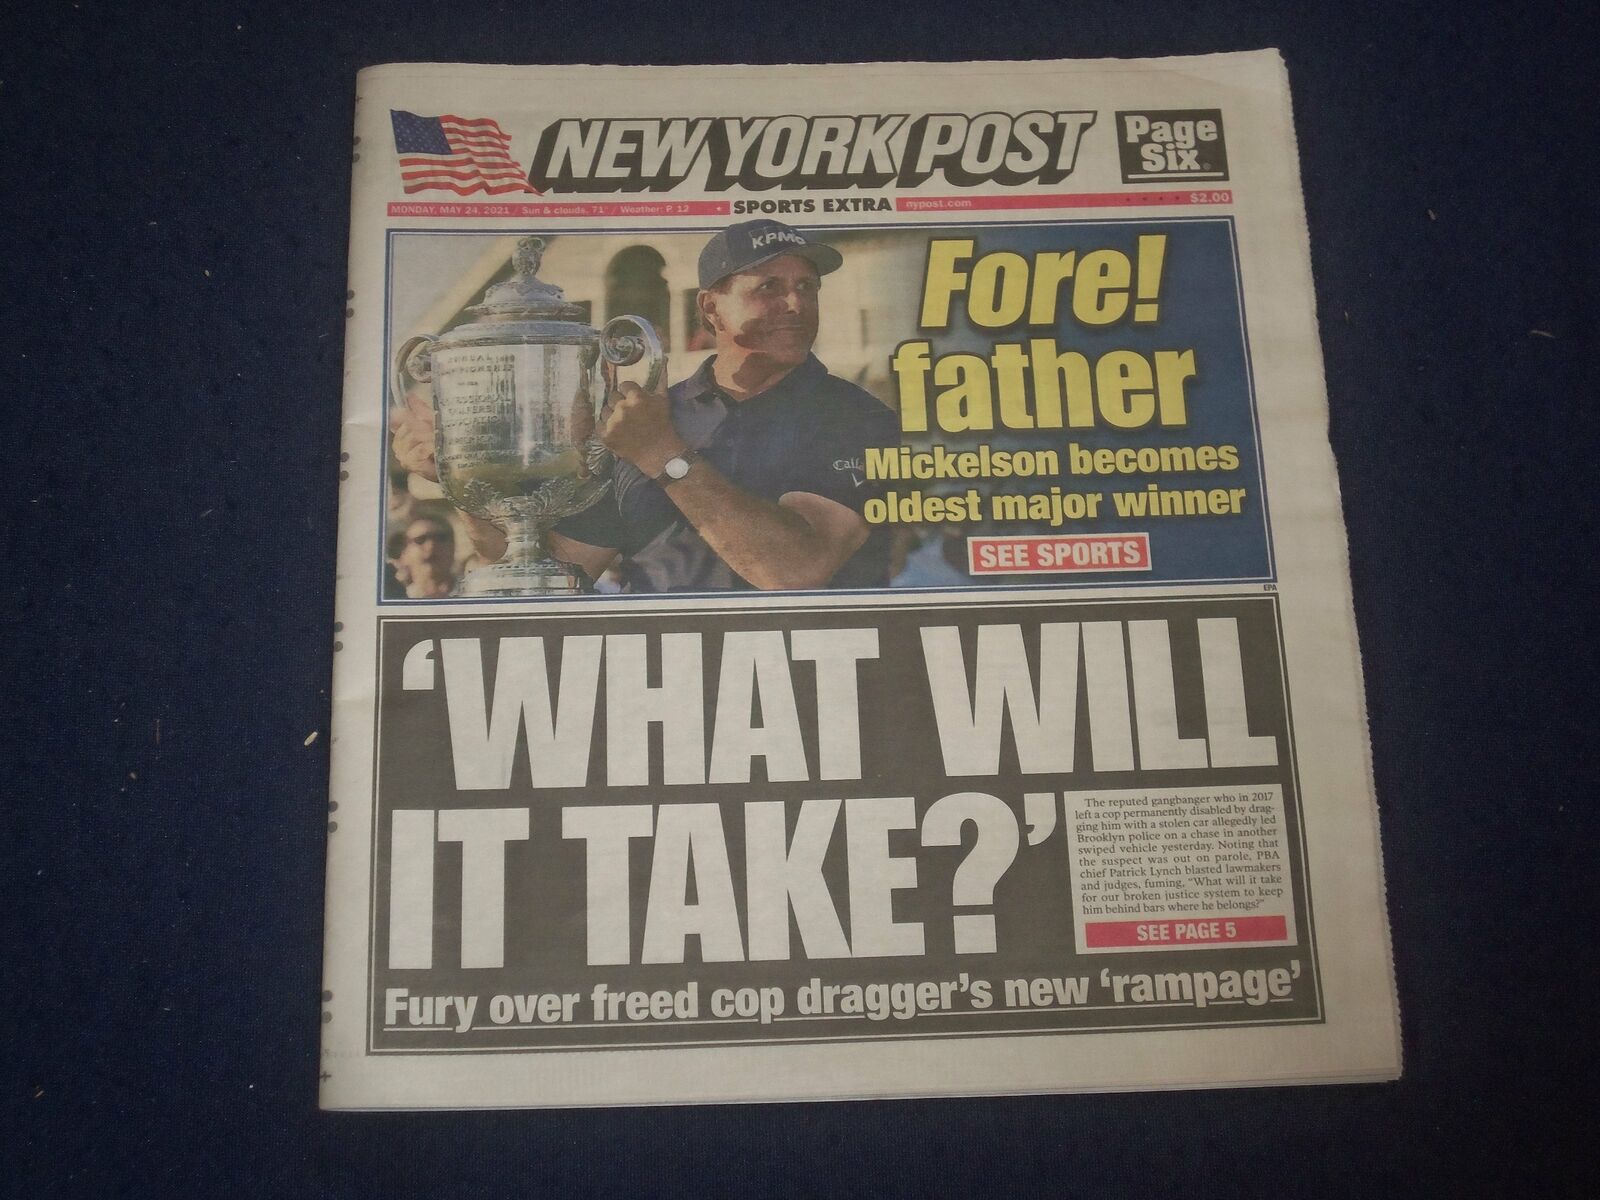 2021 MAY 24 NEW YORK POST NEWSPAPER-PHIL MICKELSON OLDEST 2 WIN PGA CHAMPIONSHIP